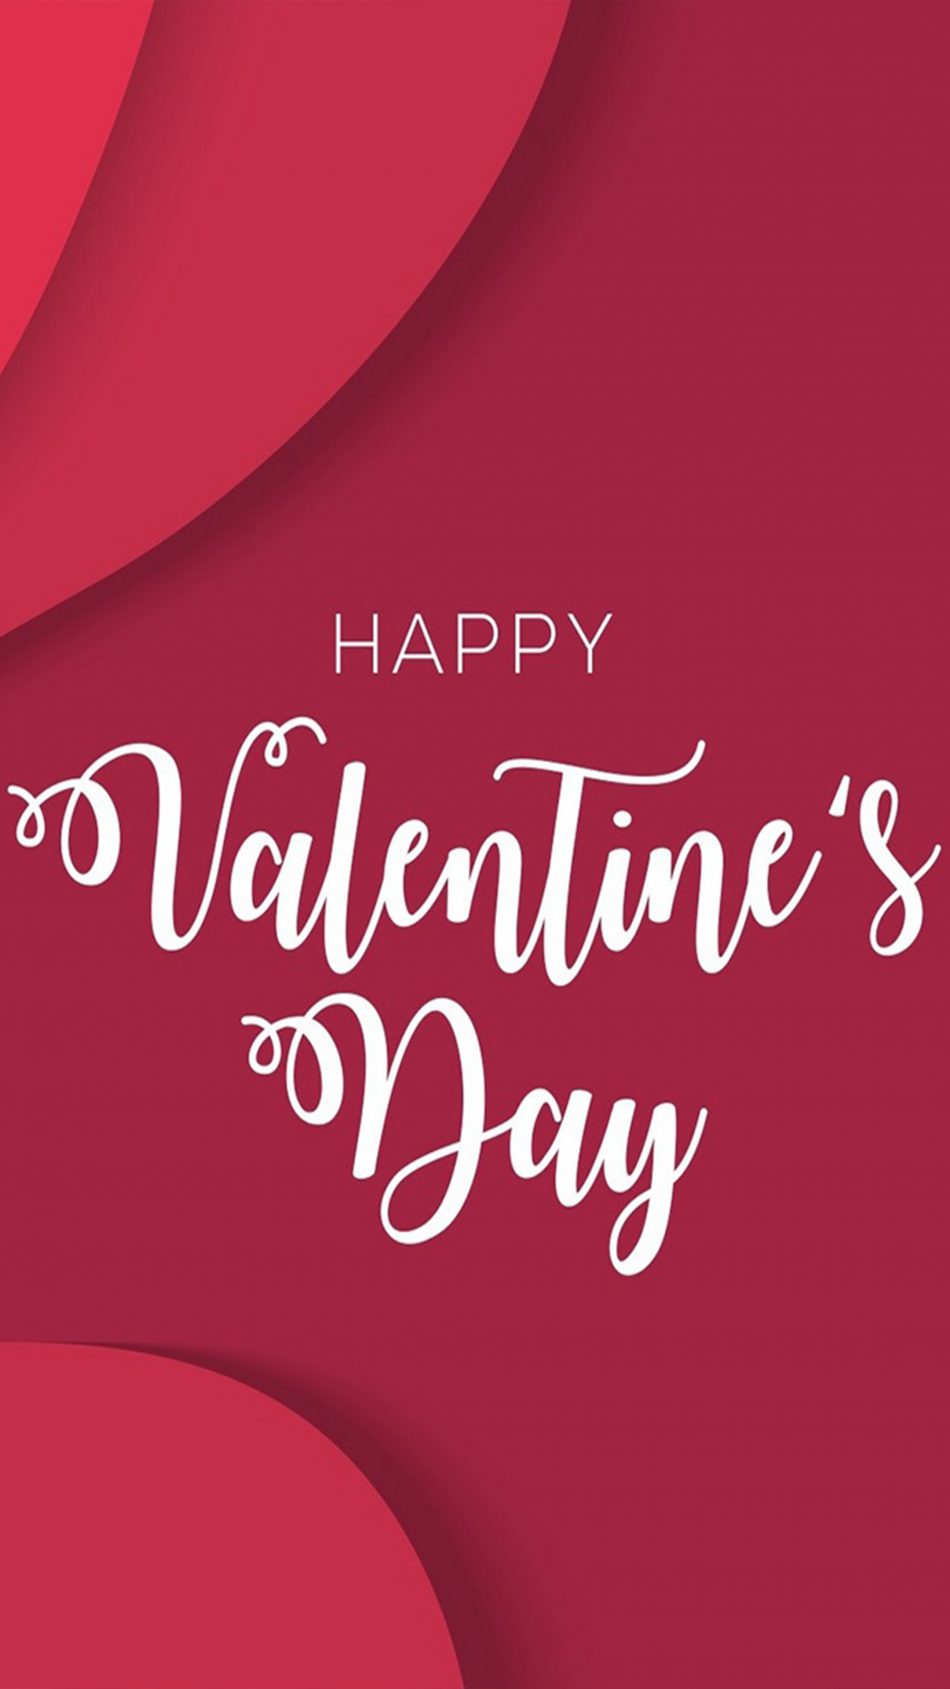 Valentines Day Wallpaper - Happy Valentines Day Wallpaper Mobile , HD Wallpaper & Backgrounds